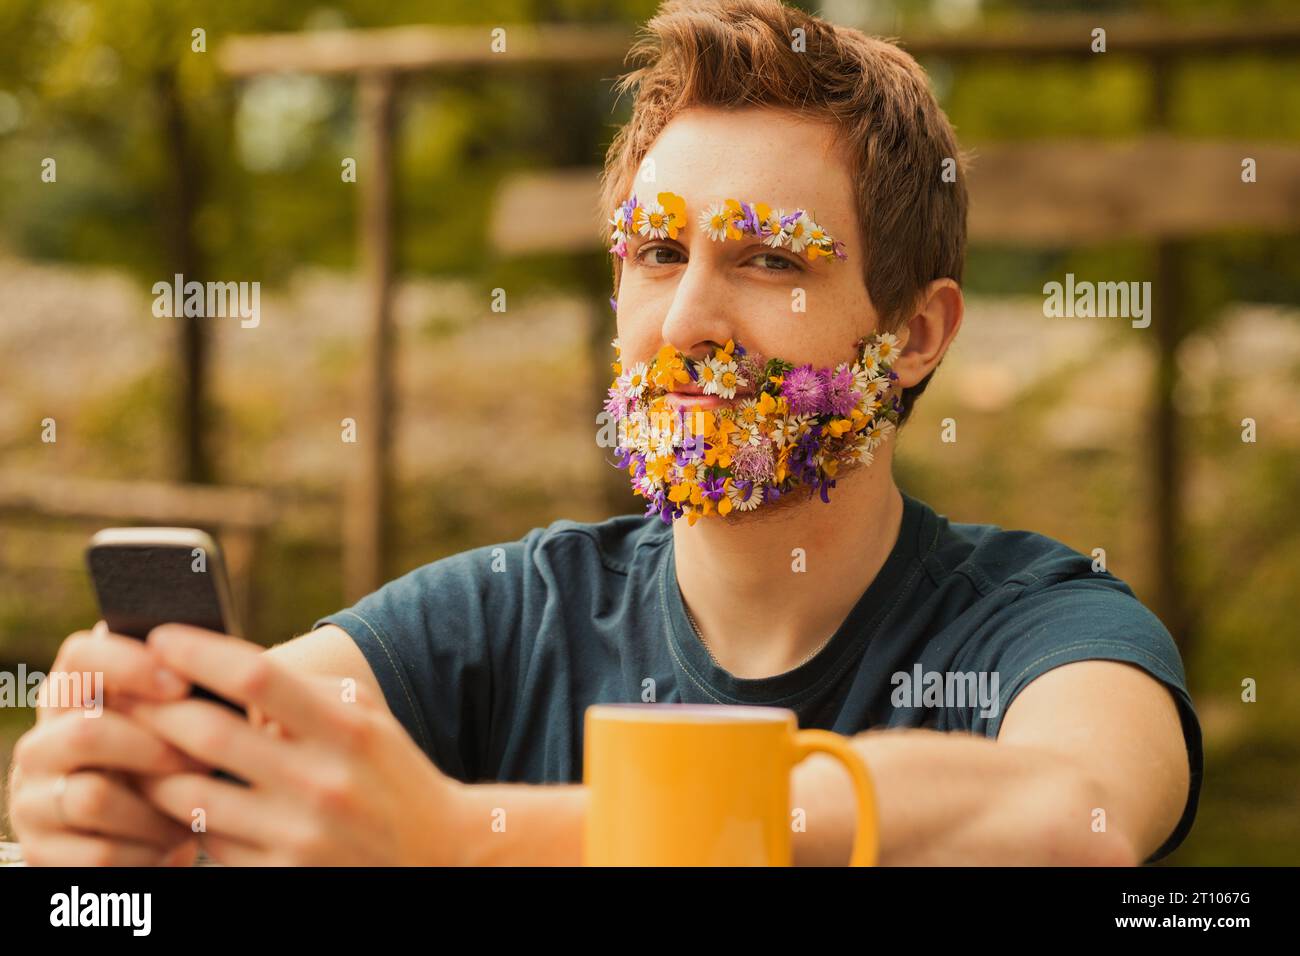 Young man with colorful spring flowers instead of facial hair sits amidst nature. While cherishing the tranquility and fresh air, he doesn't despise t Stock Photo